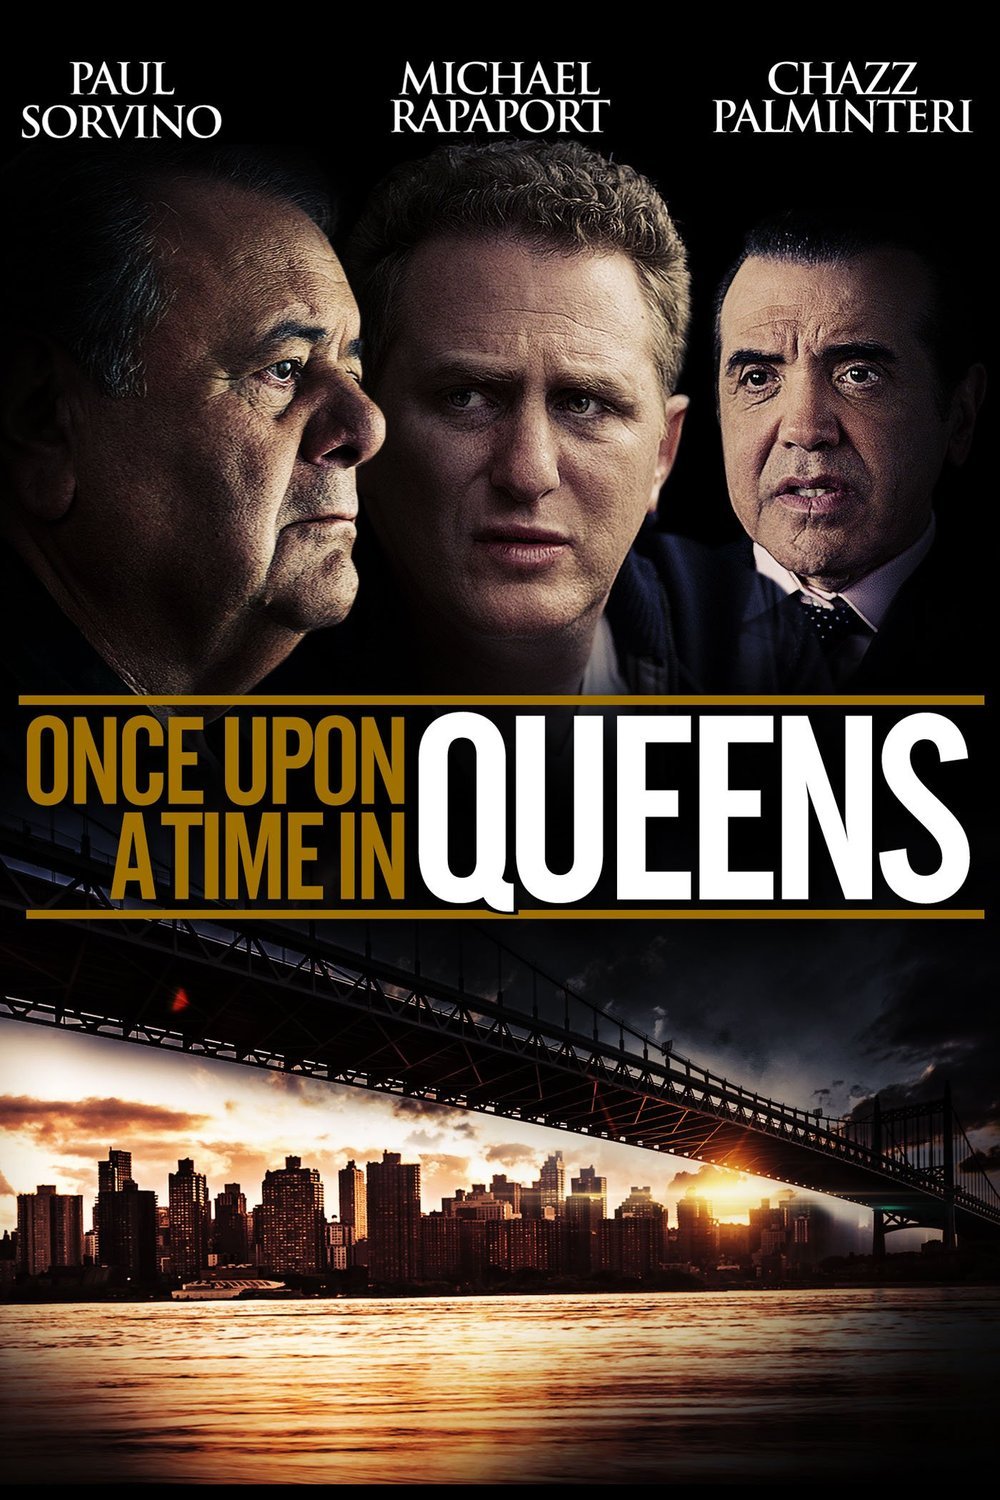 Poster of the movie Once Upon a Time in Queens